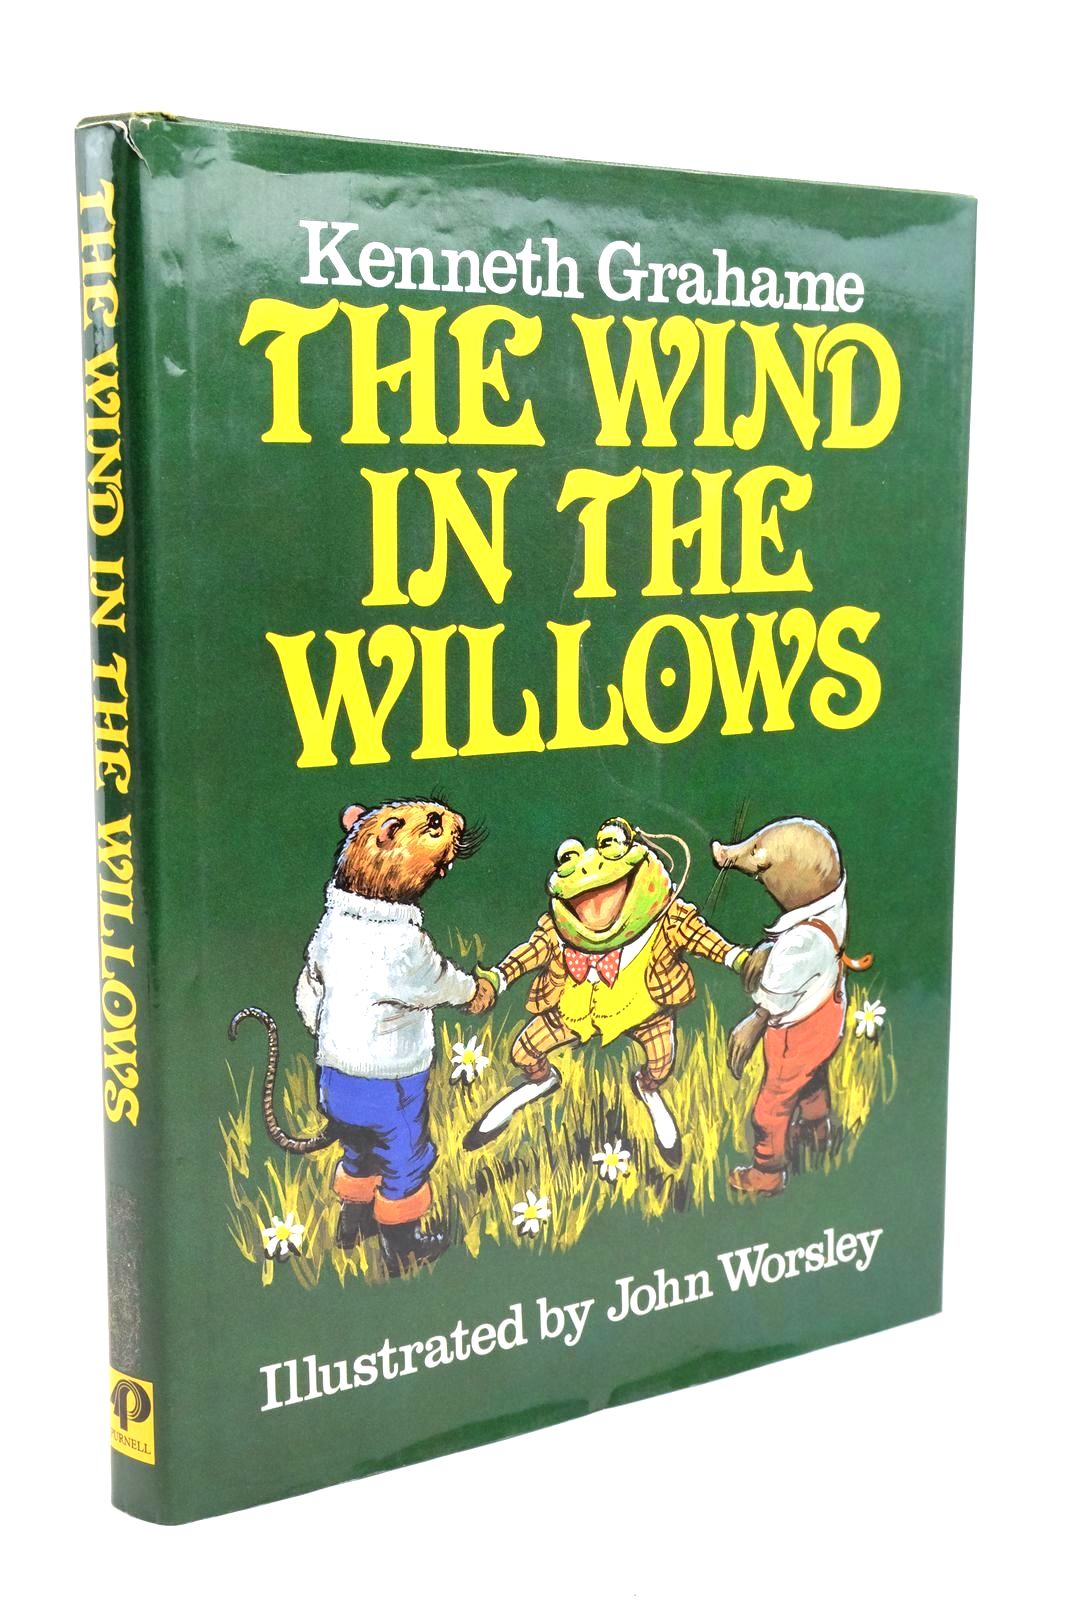 Photo of THE WIND IN THE WILLOWS written by Grahame, Kenneth illustrated by Worsley, John published by Purnell (STOCK CODE: 1322118)  for sale by Stella & Rose's Books